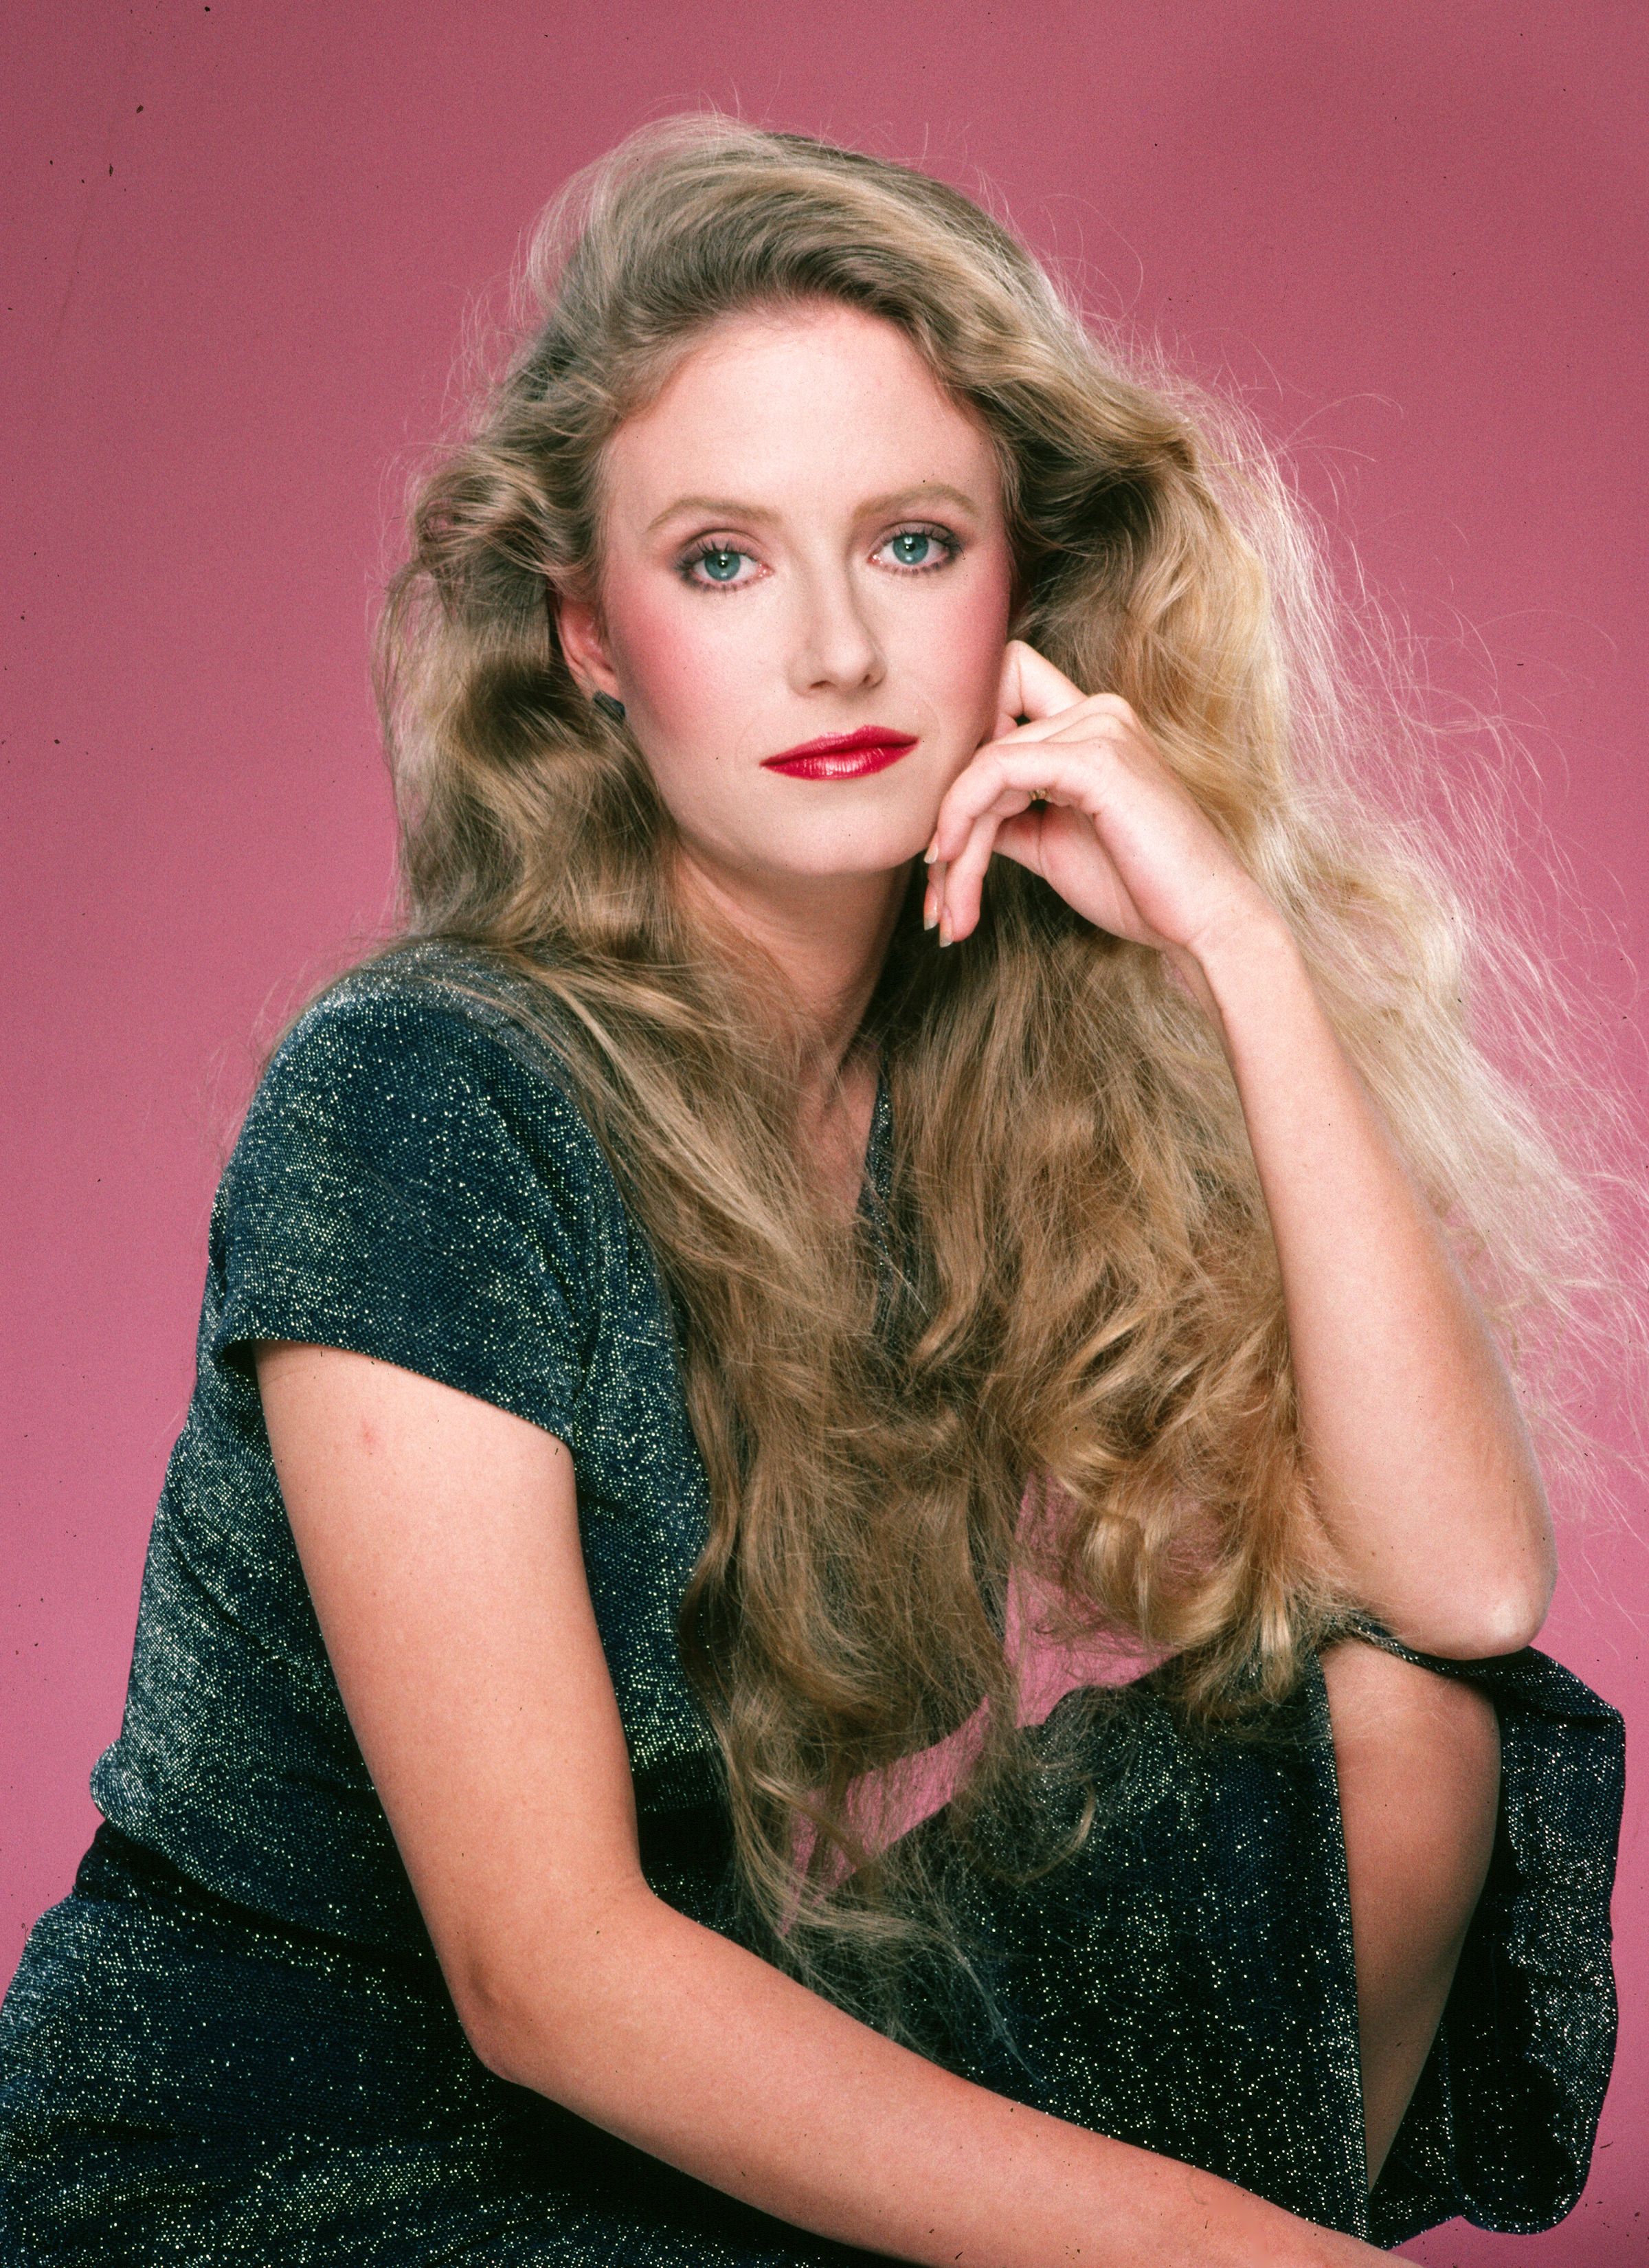 A portrait of Eve Plumb in Los Angeles in 1982 | Source: Getty Images